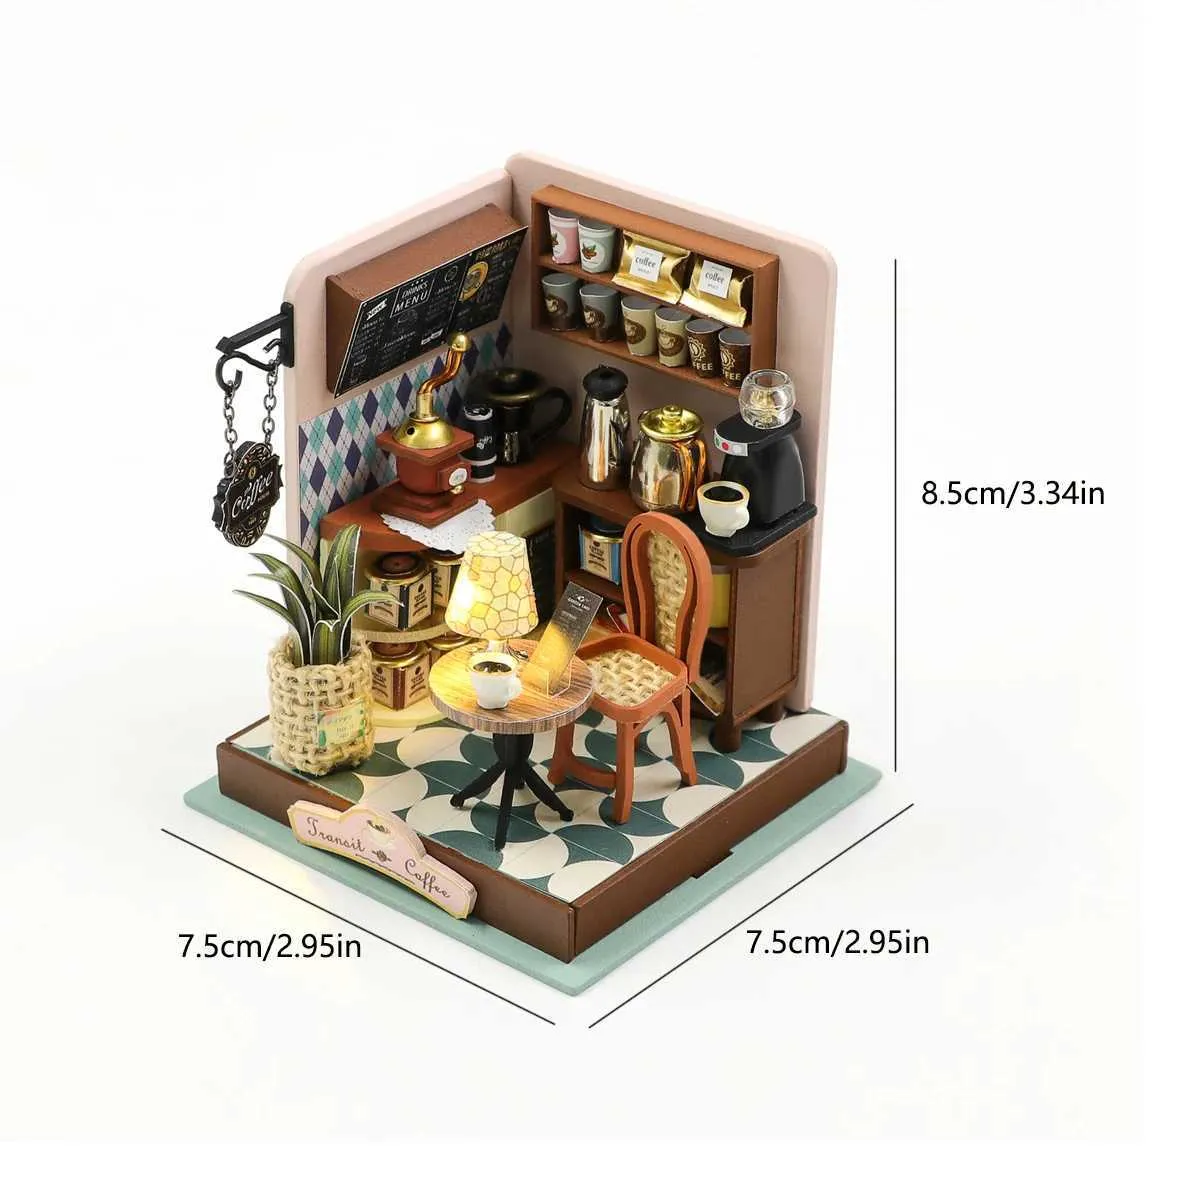 Arkitektur/DIY House Coffee Shop Baby House Kit Mini Diy Handmade 3D Pussel Assembly Building Model Toys Home Bedroom Decoration With Furniture Wood